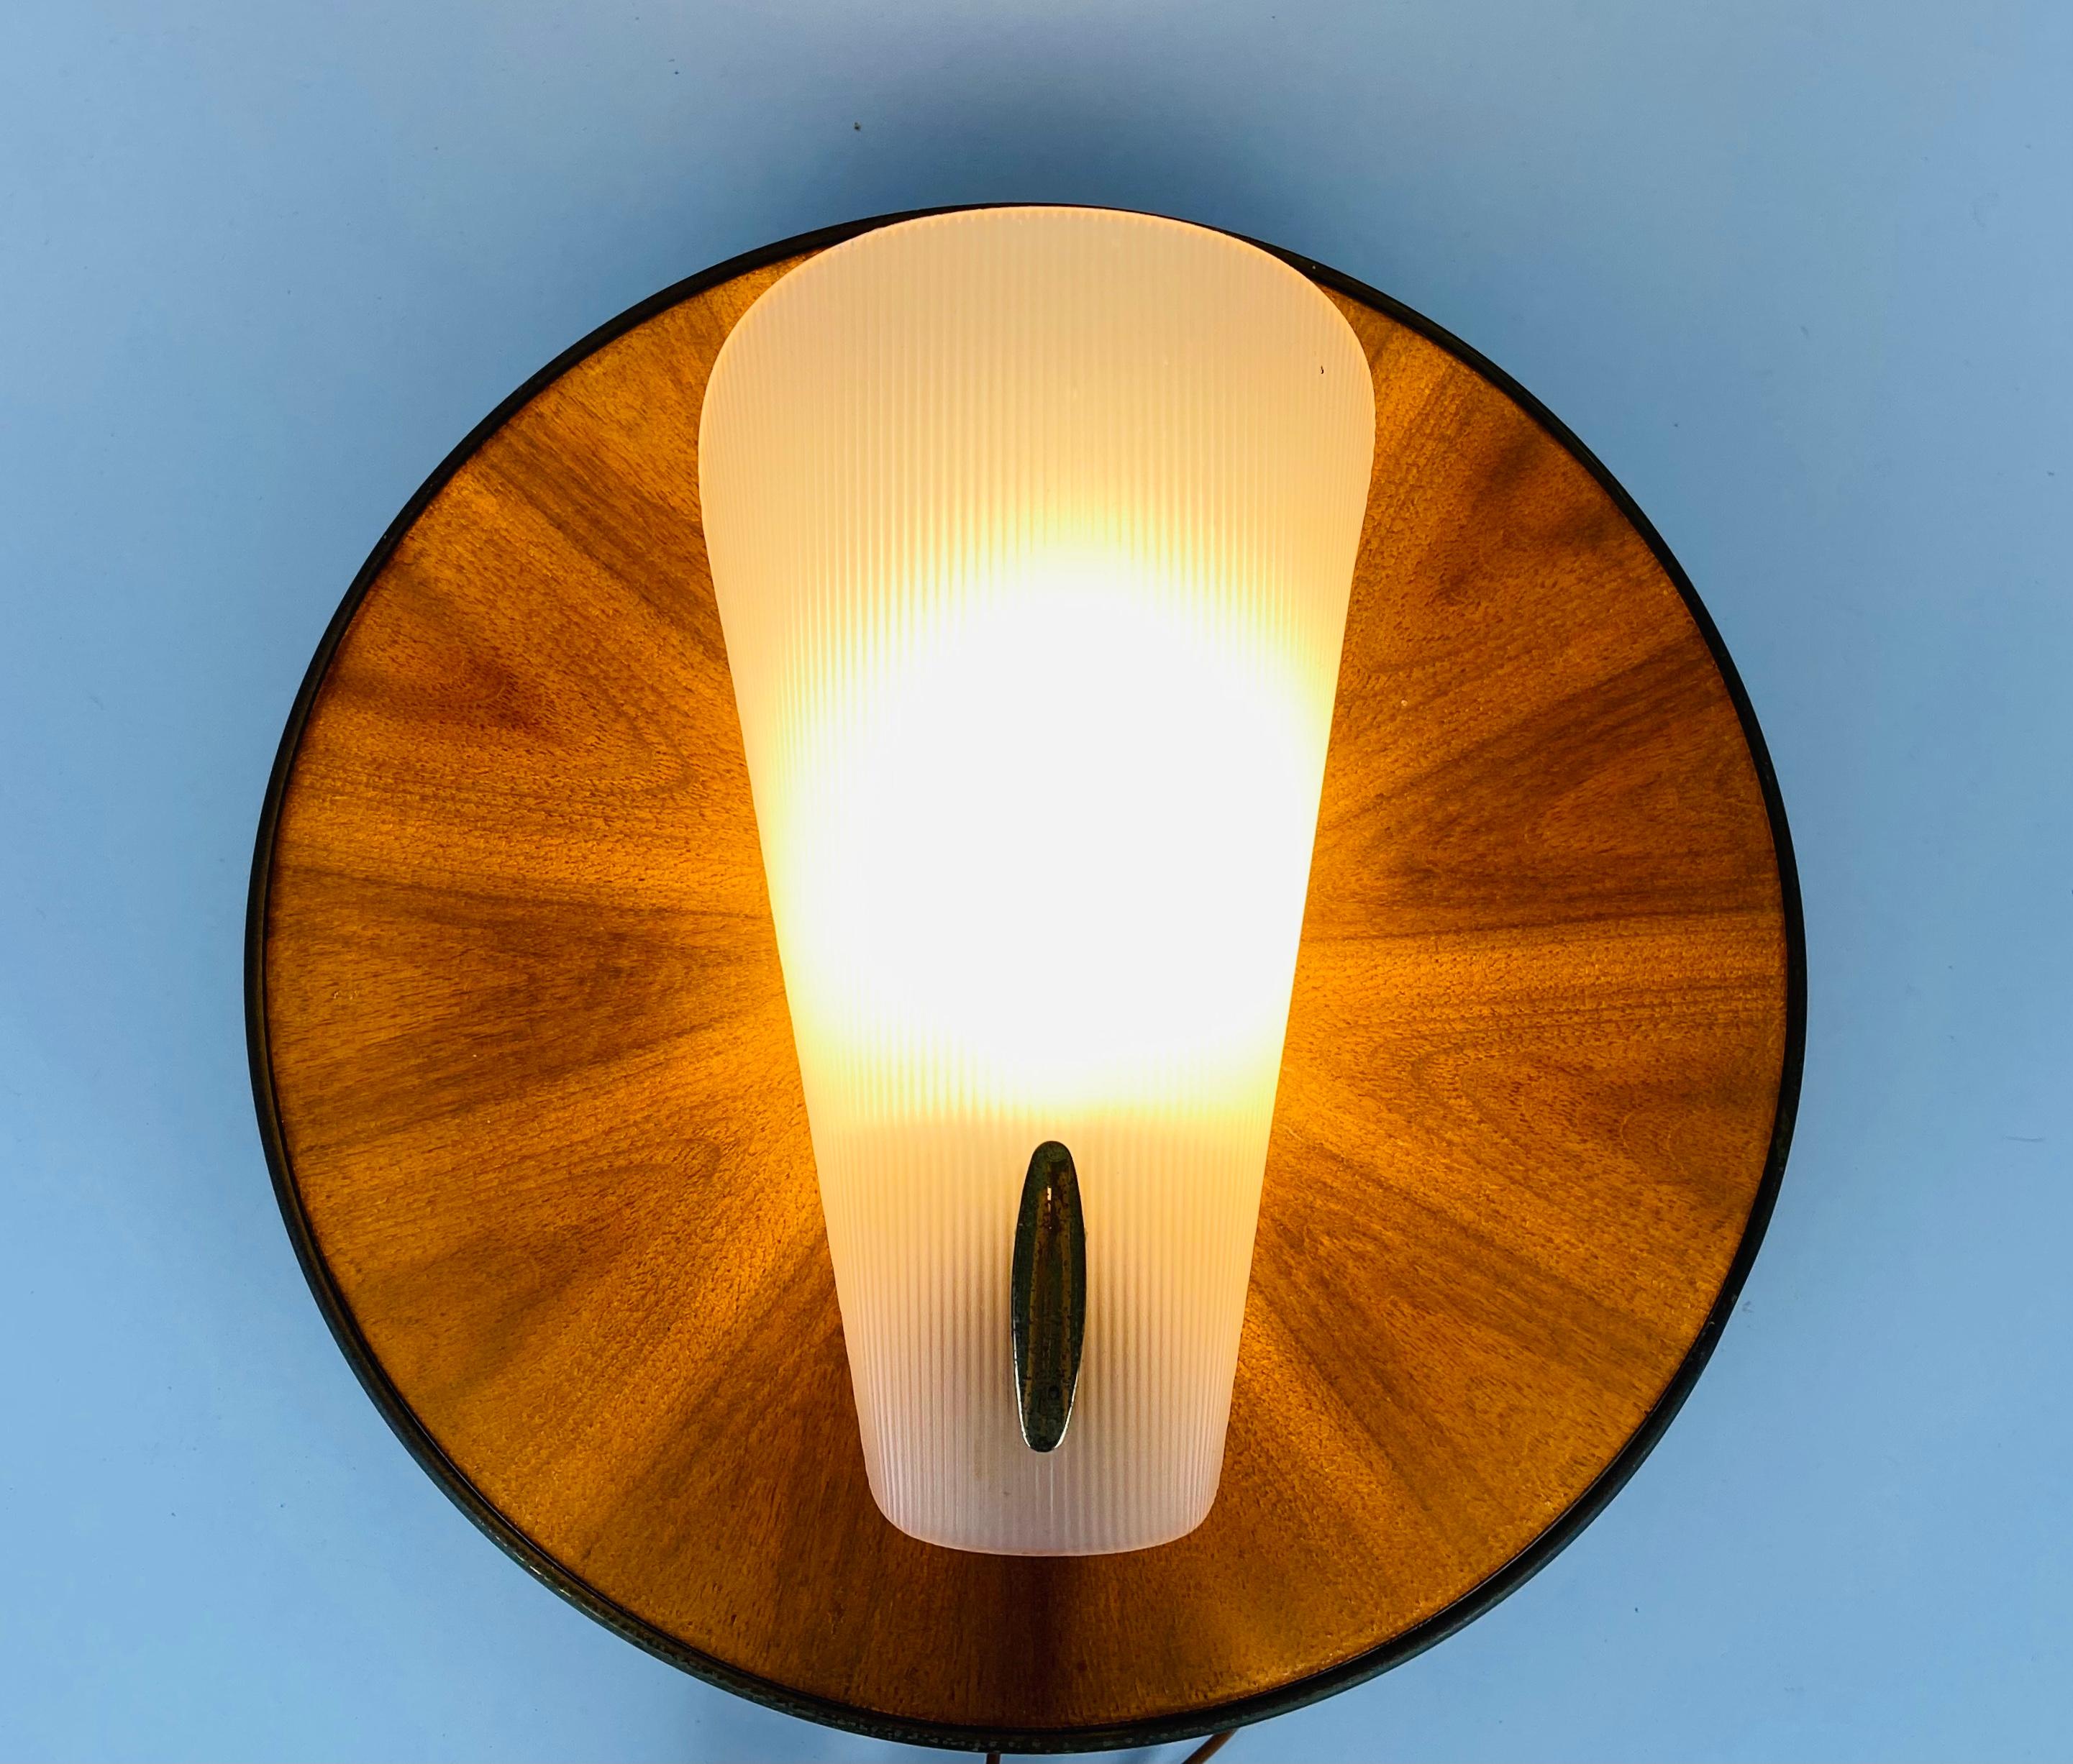 Midcentury Teak and Plexi Glass Wall Lamp in the style of Stilnovo, Italy For Sale 2